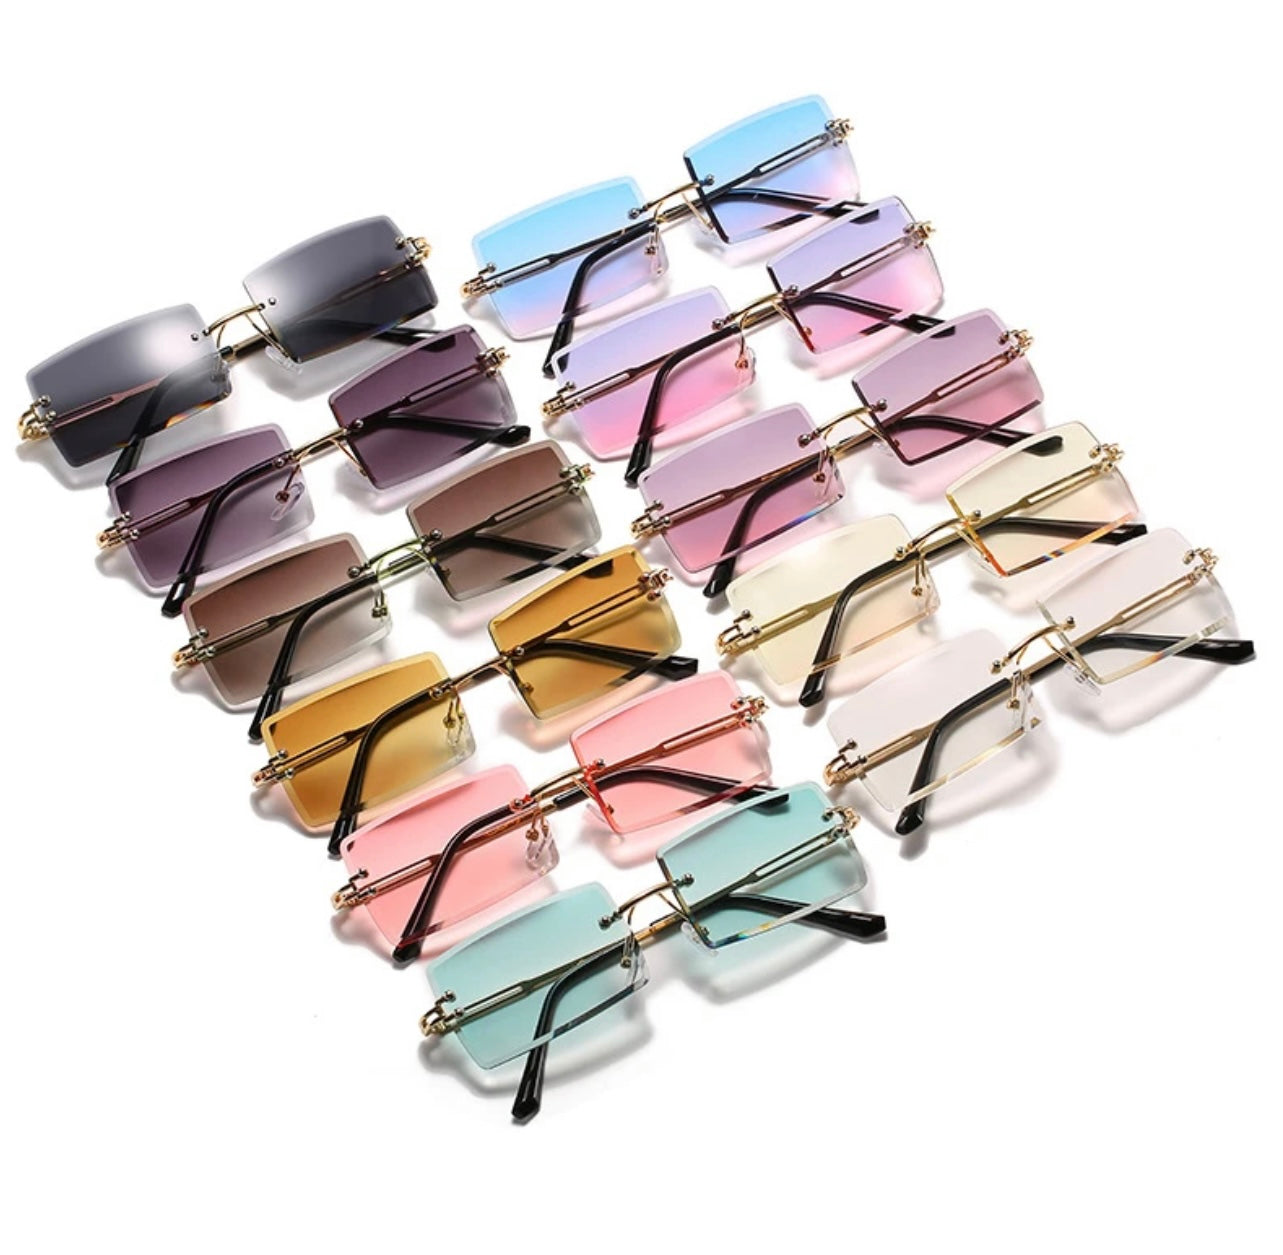 Frames for a Stylish Perspective: Aesthetic Glasses Collection